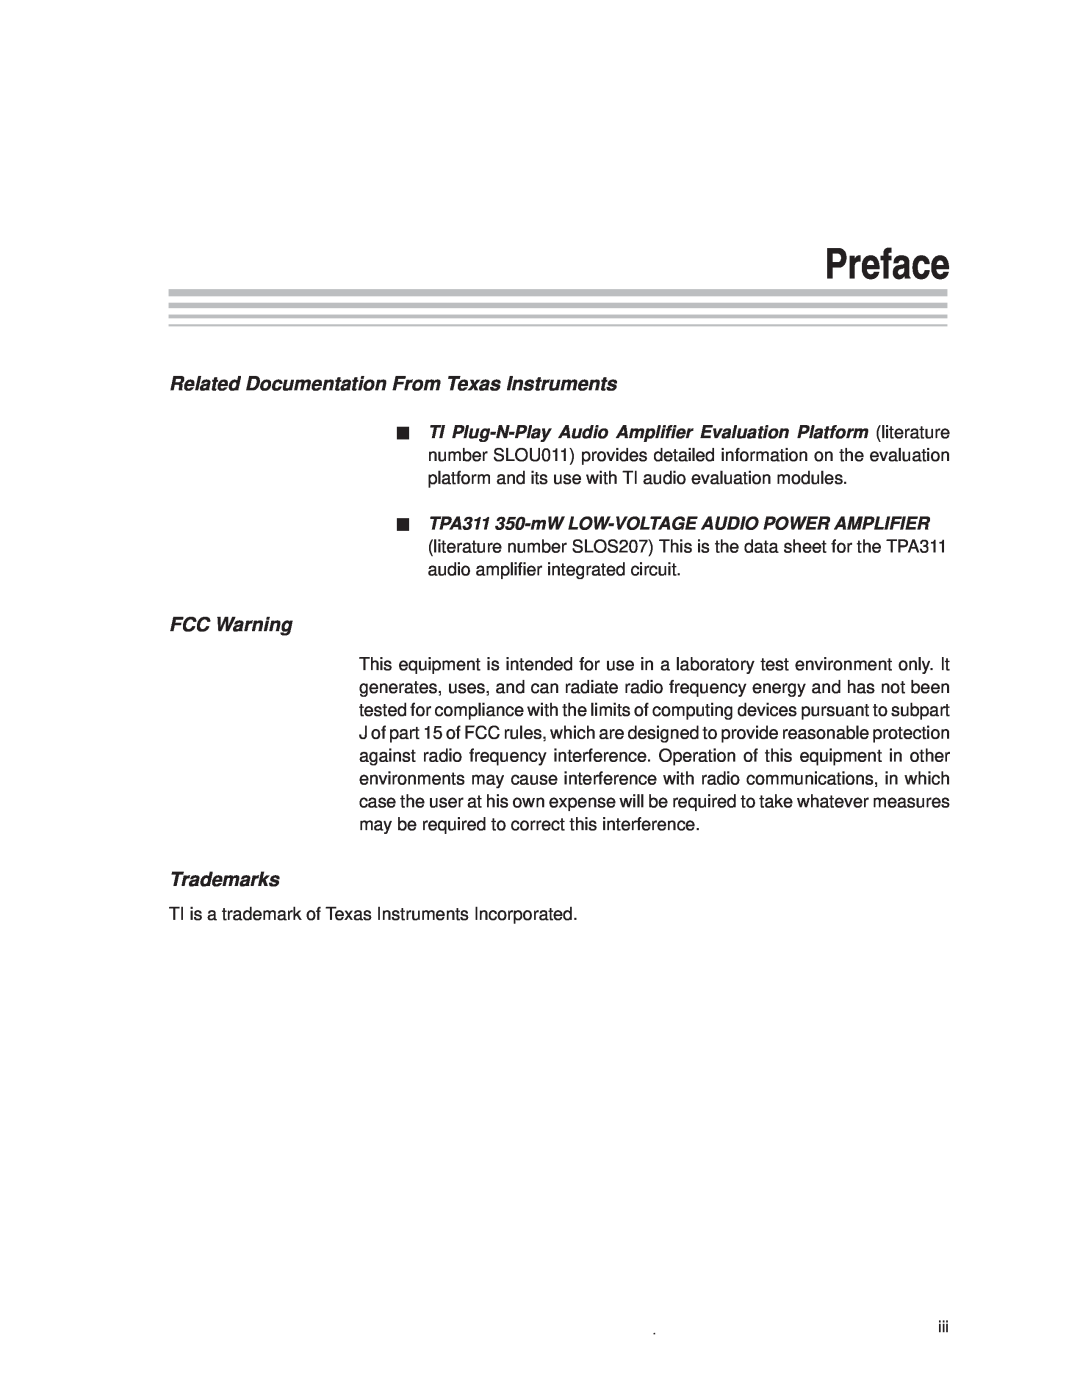 Texas Instruments TPA 311 manual Preface, Related Documentation From Texas Instruments, FCC Warning, Trademarks 